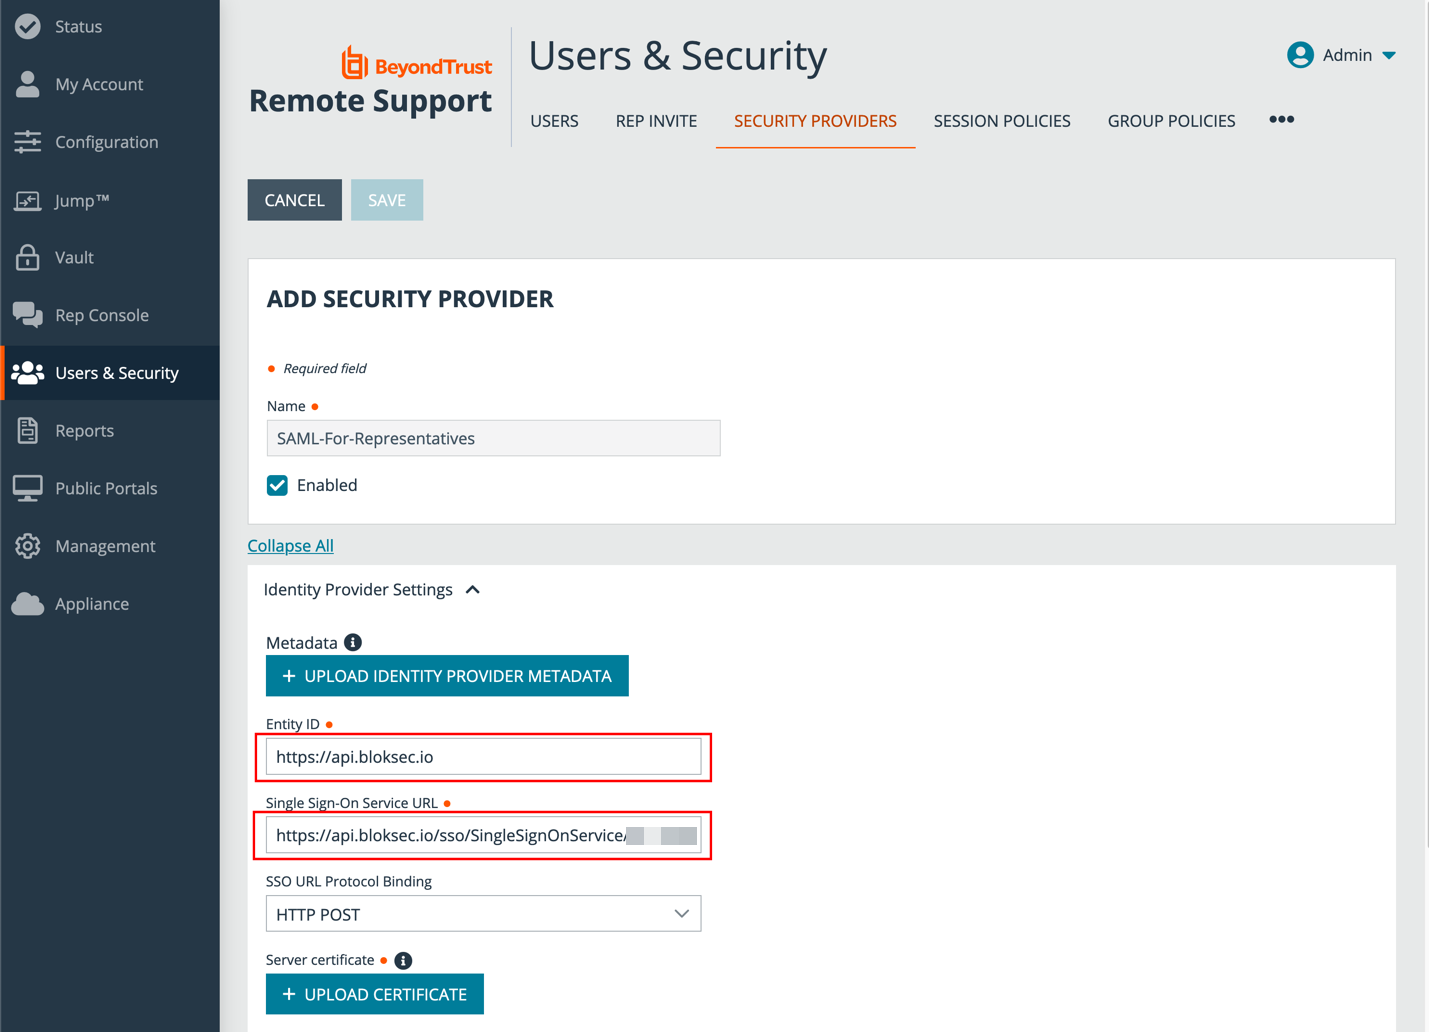 Set the values for Entity ID and Single Sign-On Service URL in Identity Provider Settings